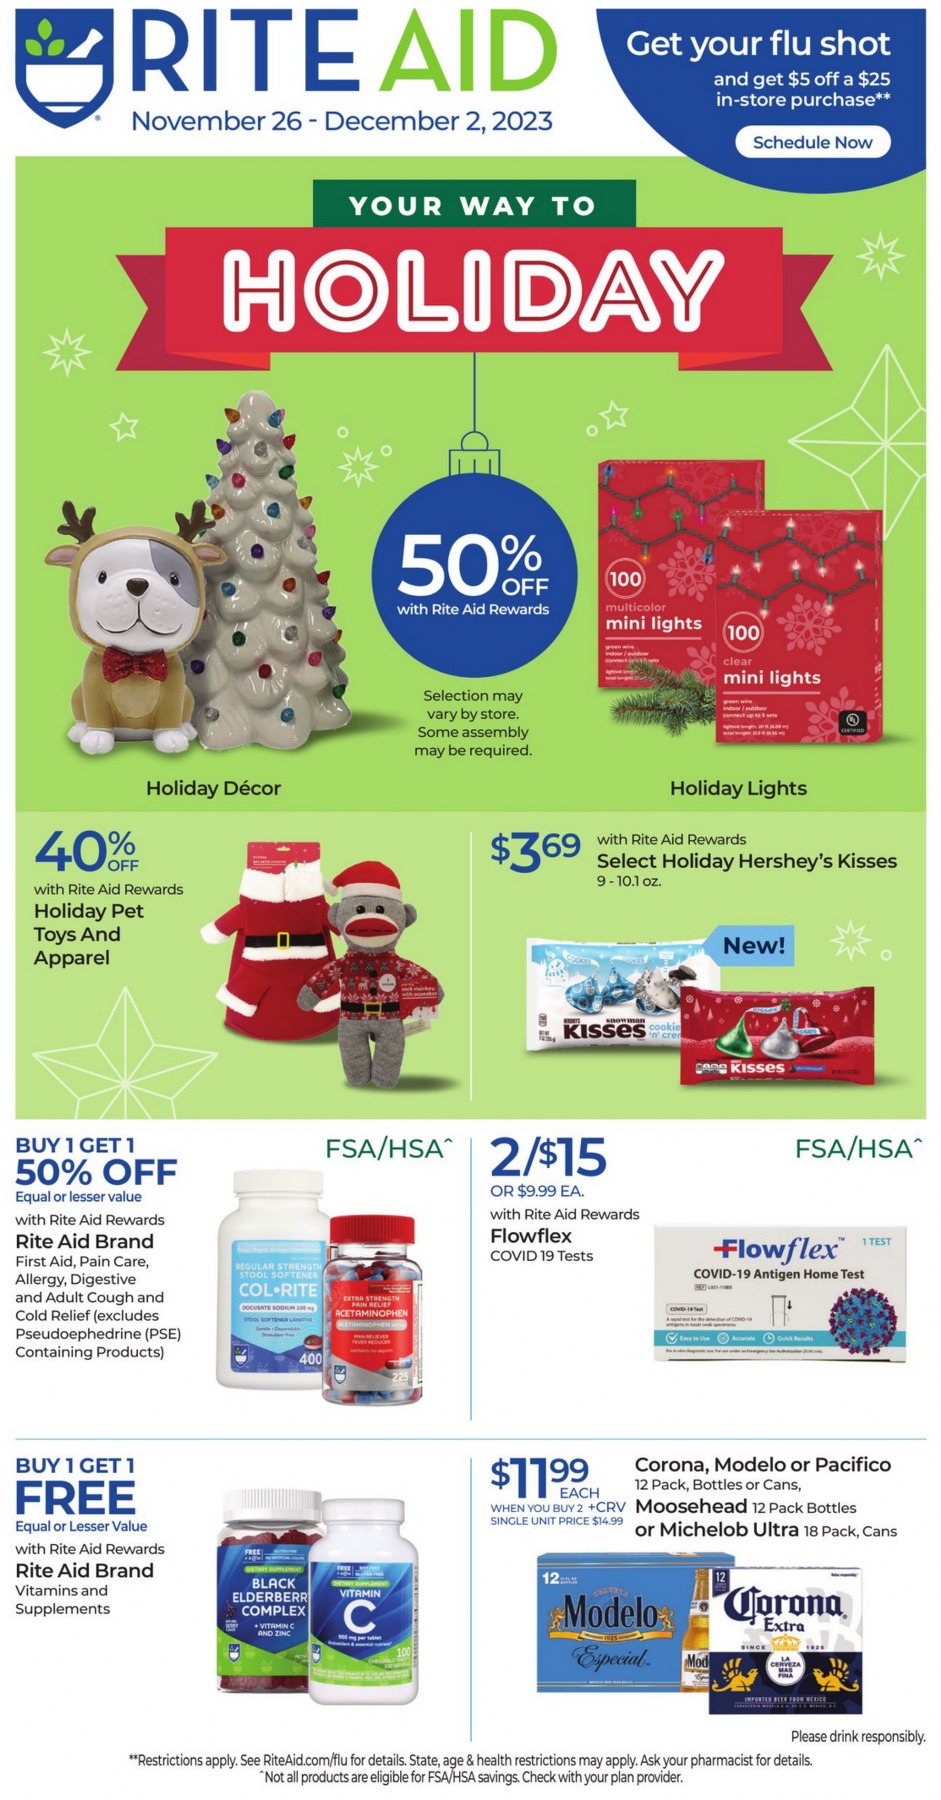 Rite Aid Weekly Ad December 17 to December 23, 2023 1 – rite aid ad 1 2